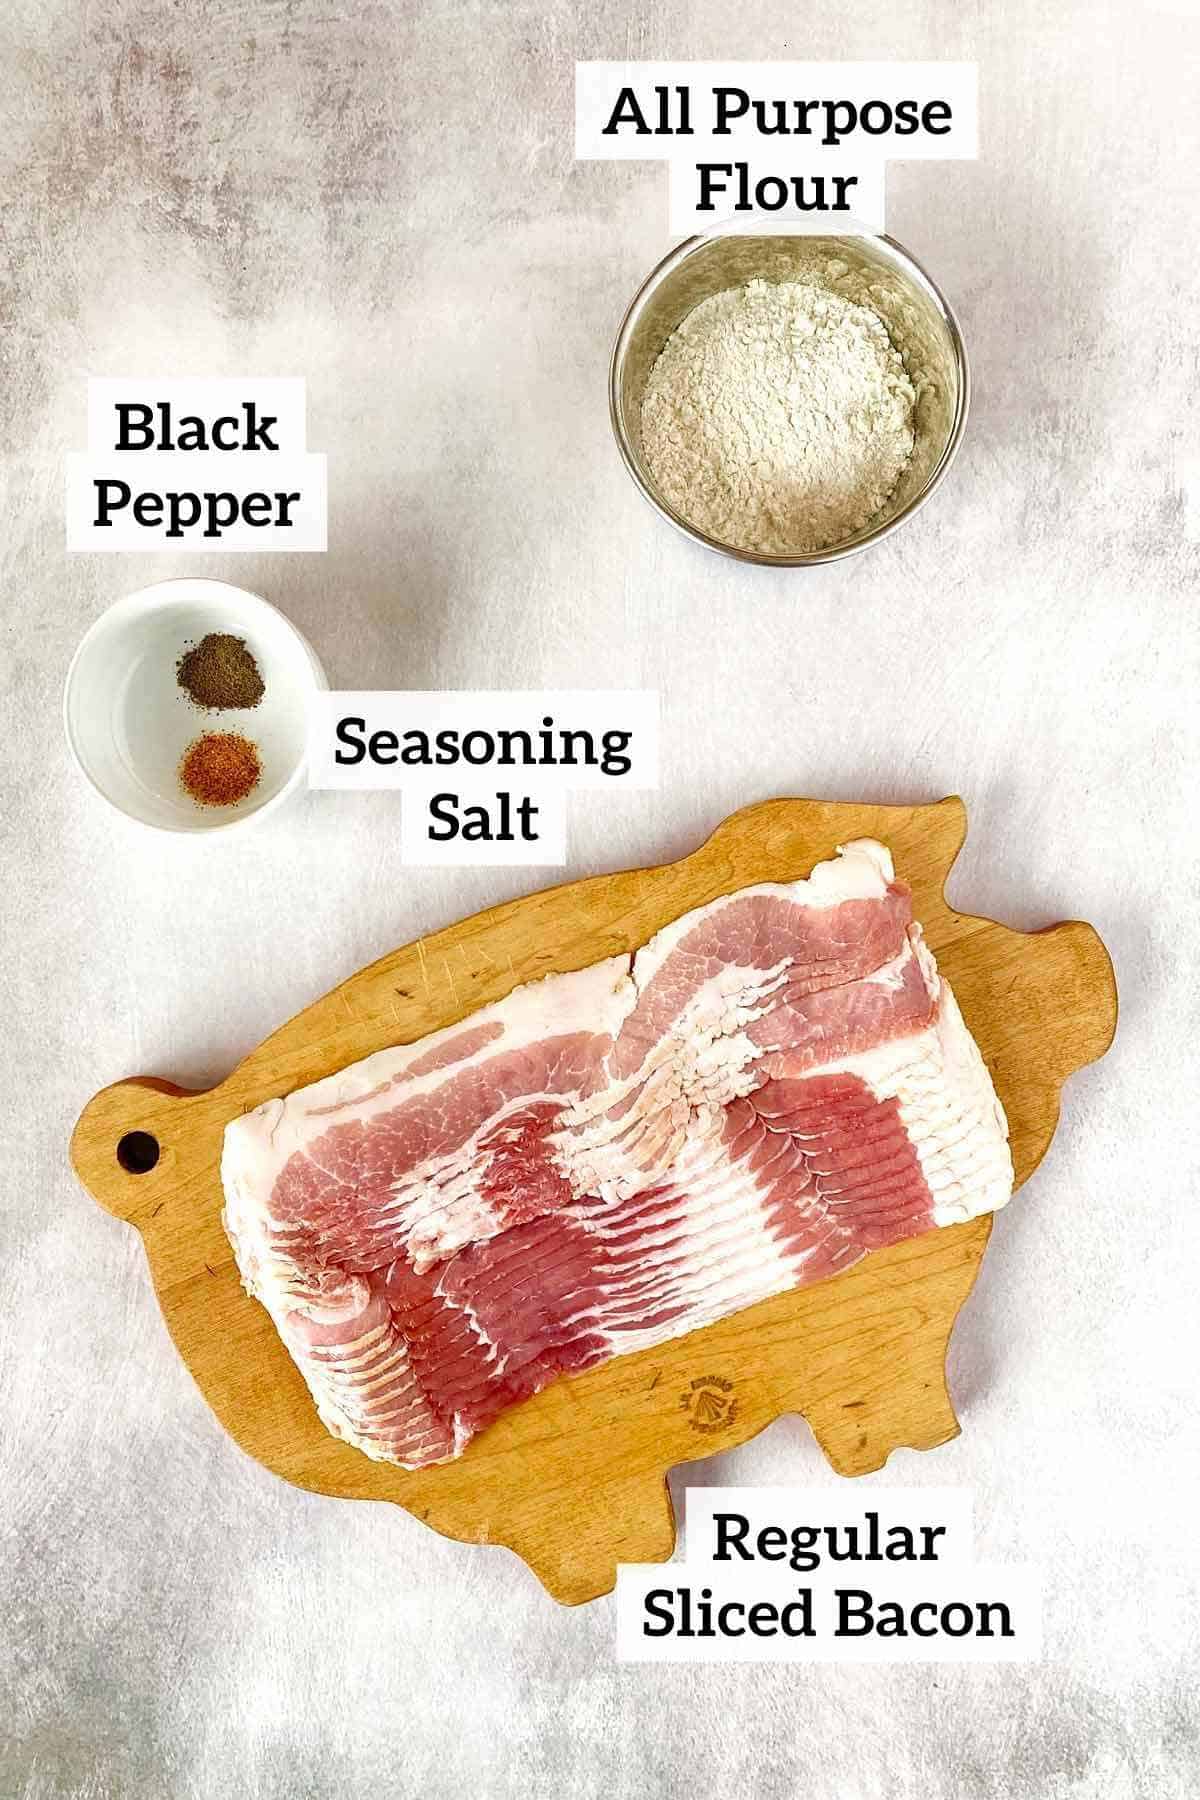 A bowl of flour, a dish with black pepper and seasoning salt, and a cutting board with raw bacon.